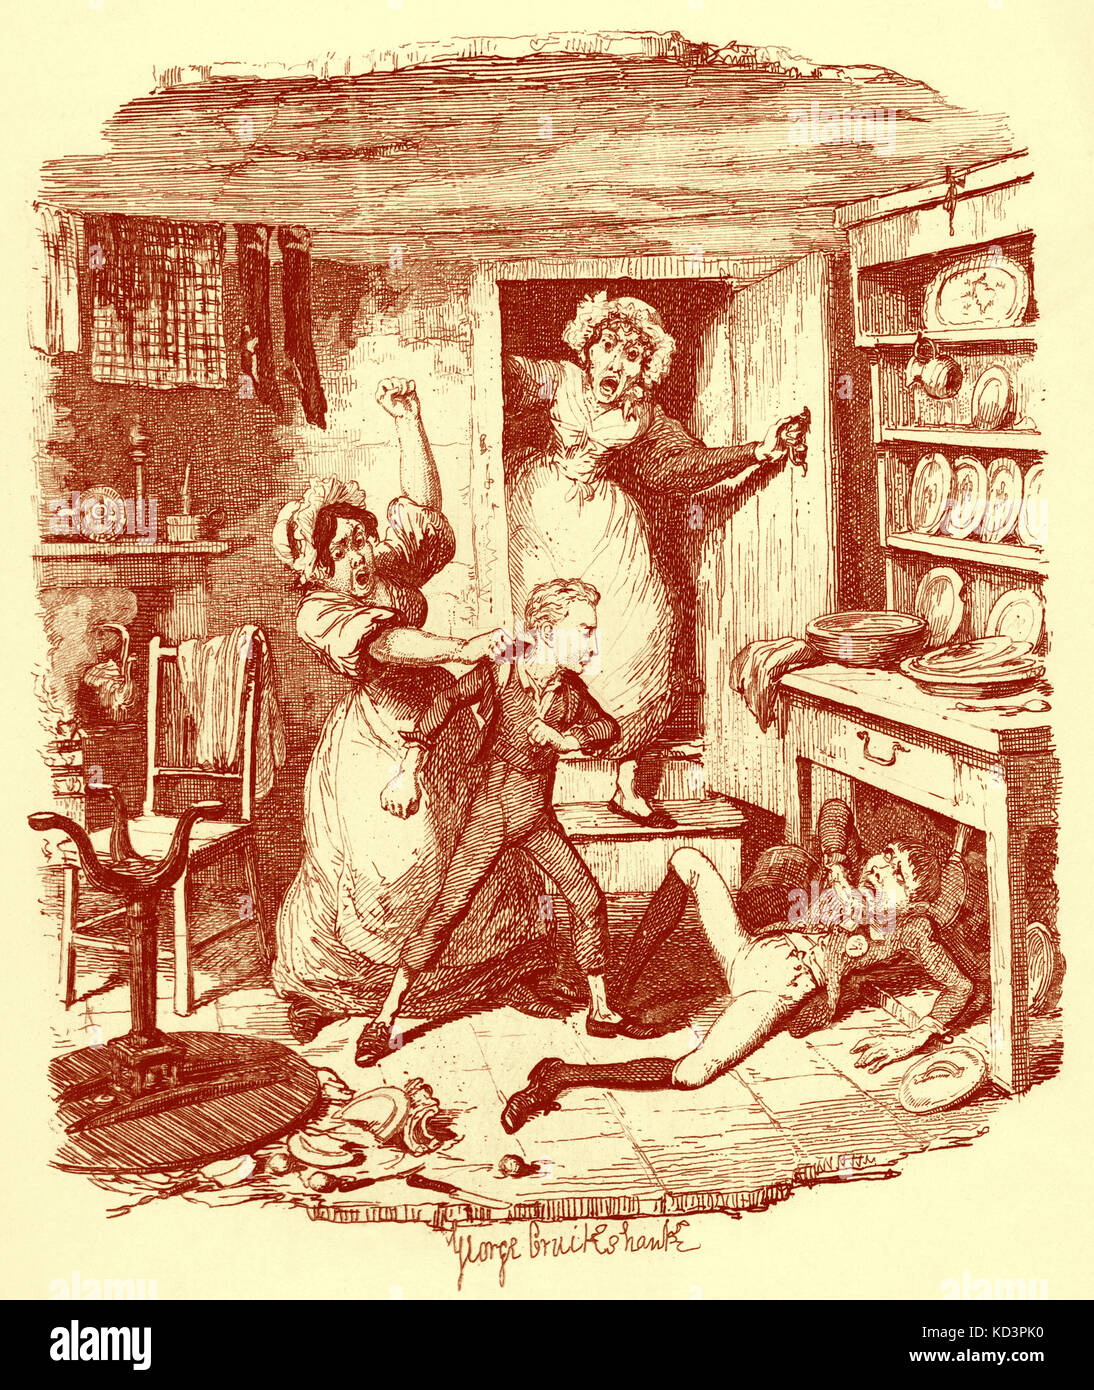 Charles Dickens 's 'The Adventures of Oliver Twist' : Oliver attacking Noah Claypole, as Charlotte tries to restrain him and Mrs. Sowerberry looks on.  English novelist 7 February 1812 – 9 June 1870.  Illustration by George Cruikshank. Stock Photo